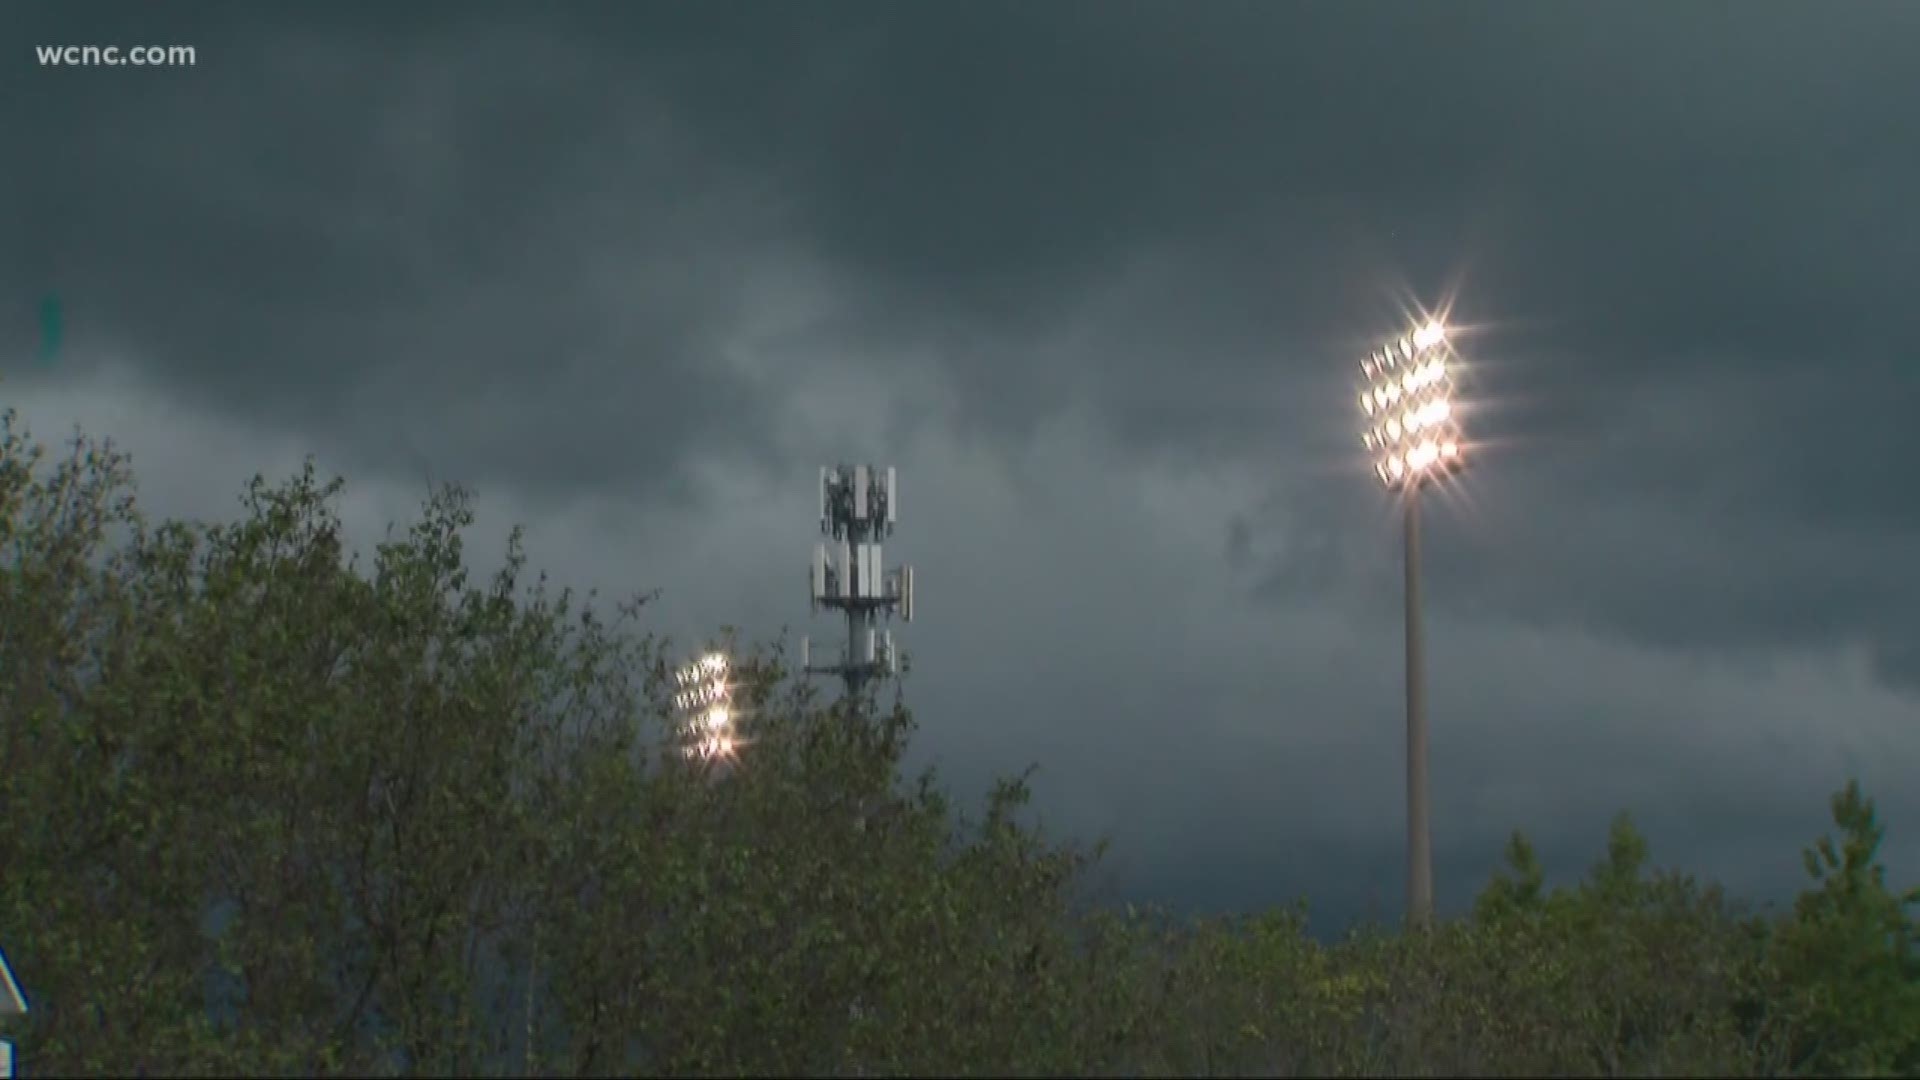 With frequent lightning and lengthy delays, many schools decided they'd be better off playing Saturday or Monday instead of Friday night.